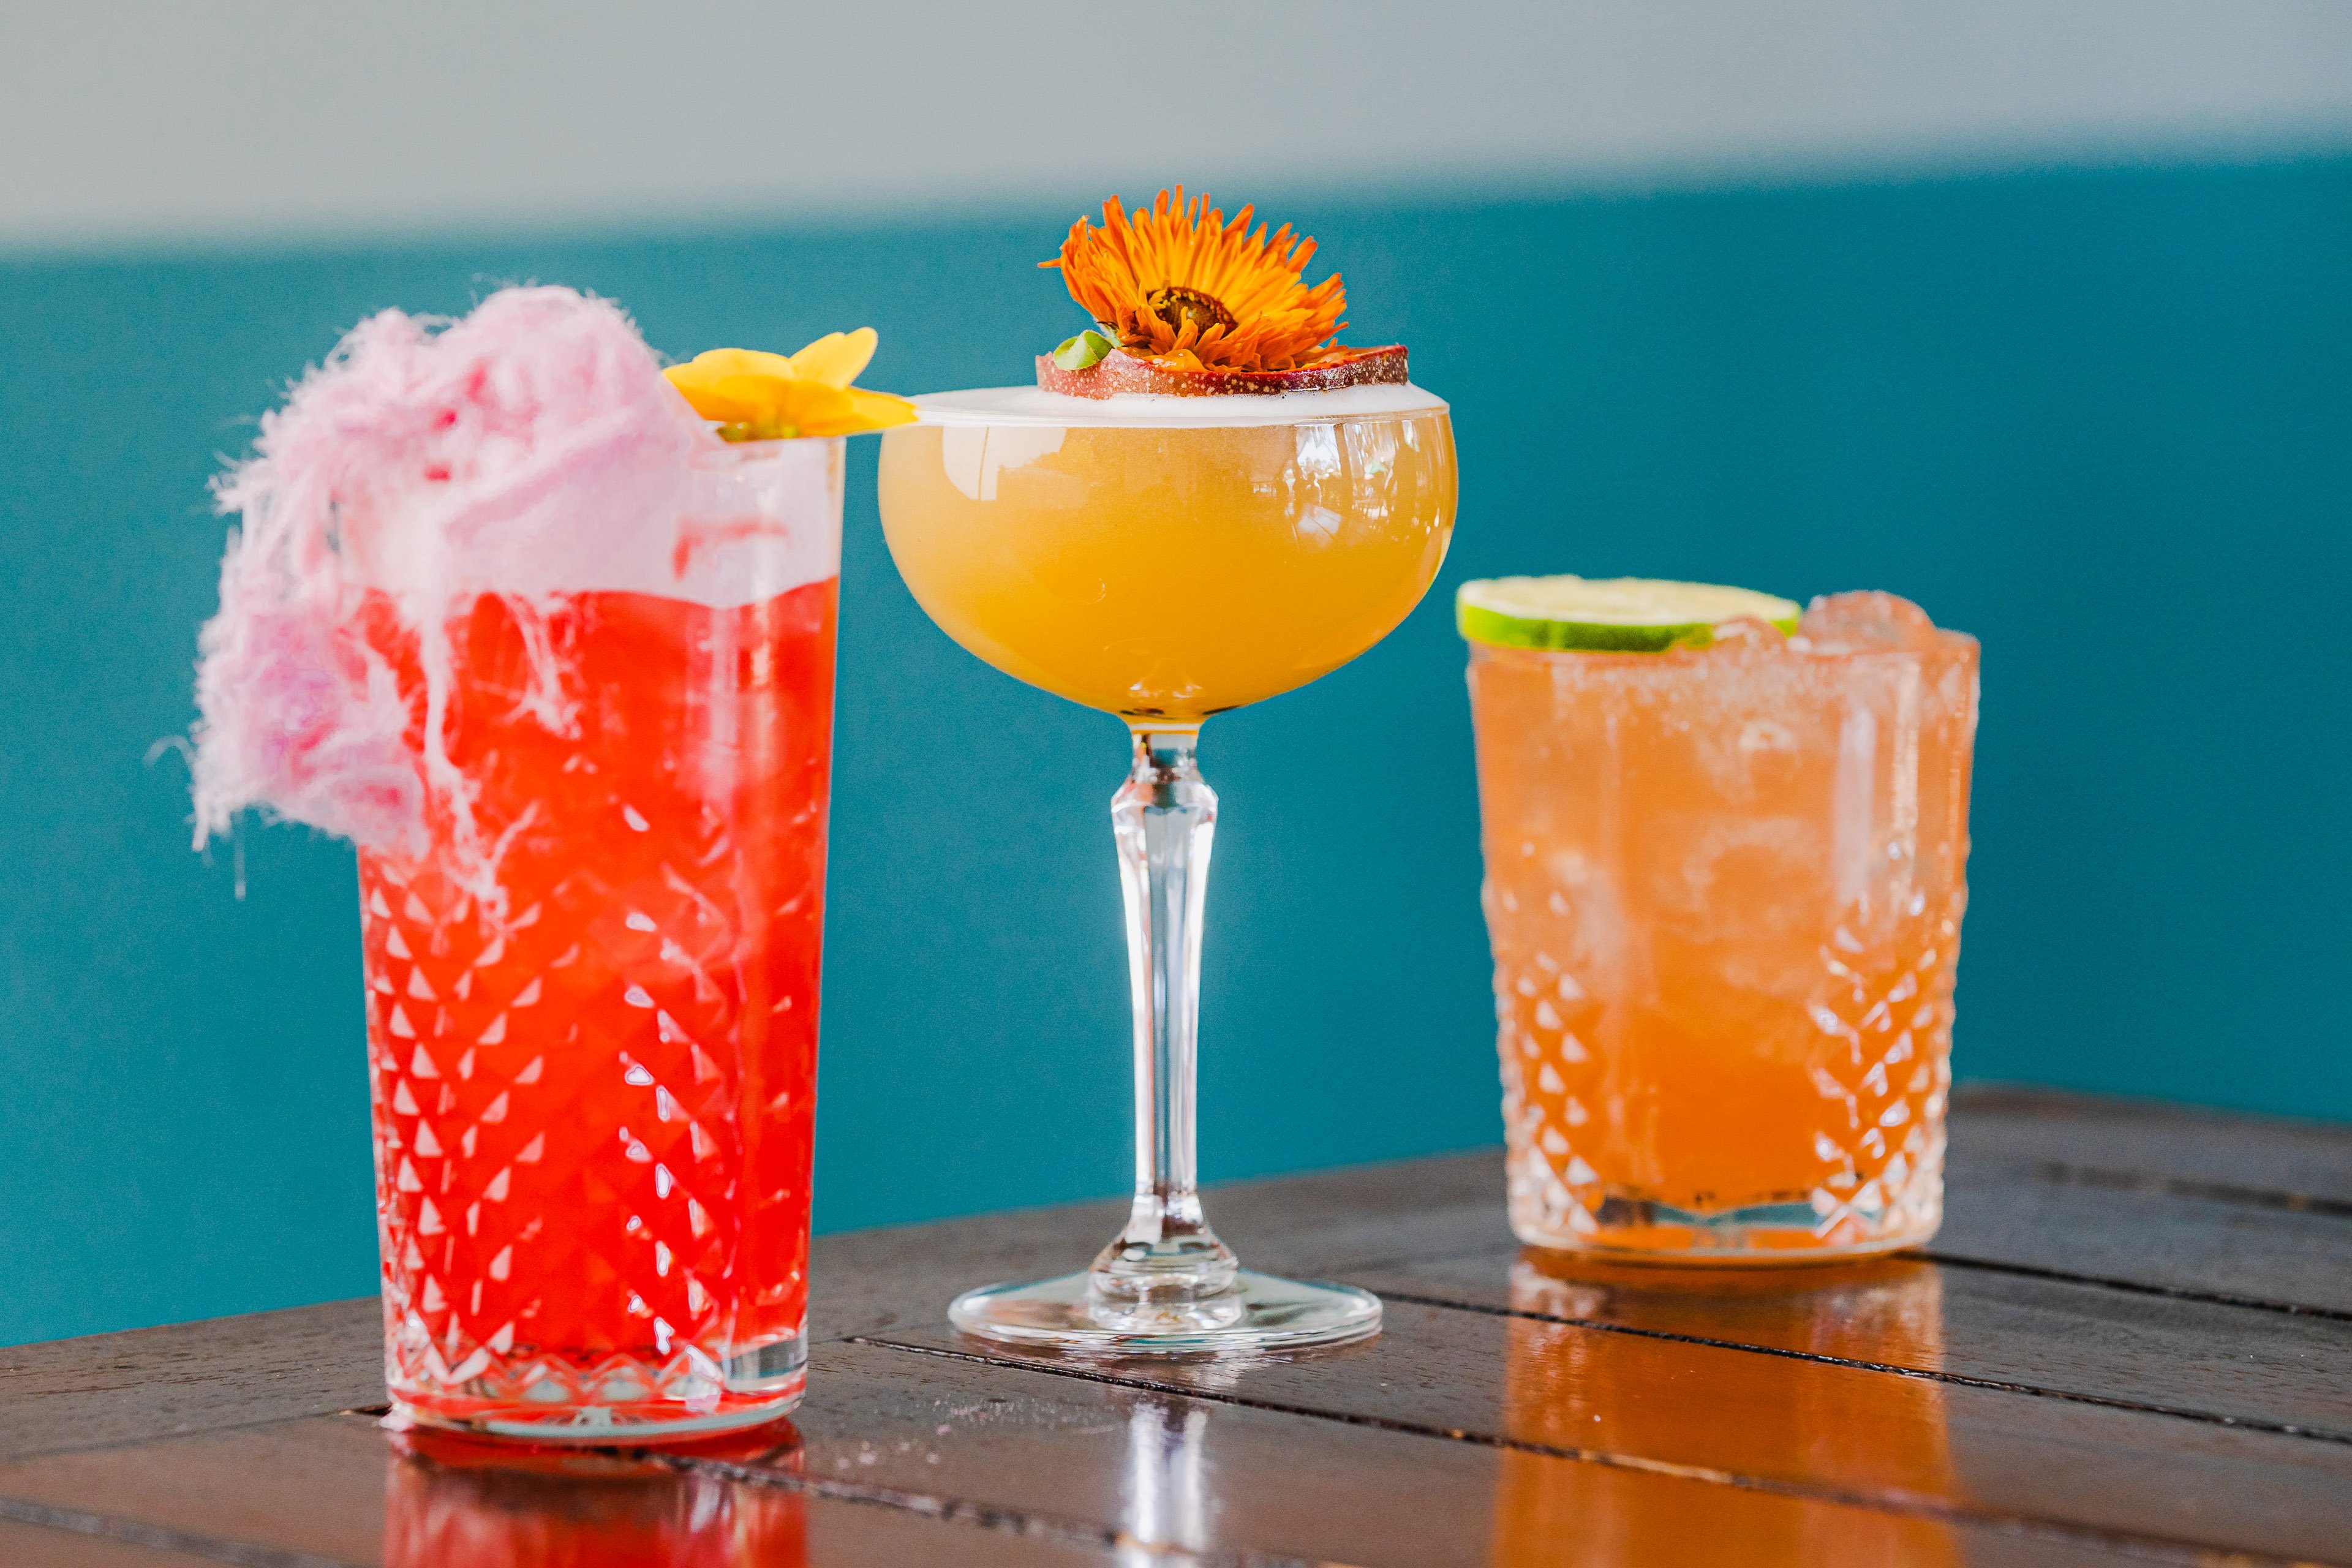 Three vibrant cocktails with an out of focus blue background